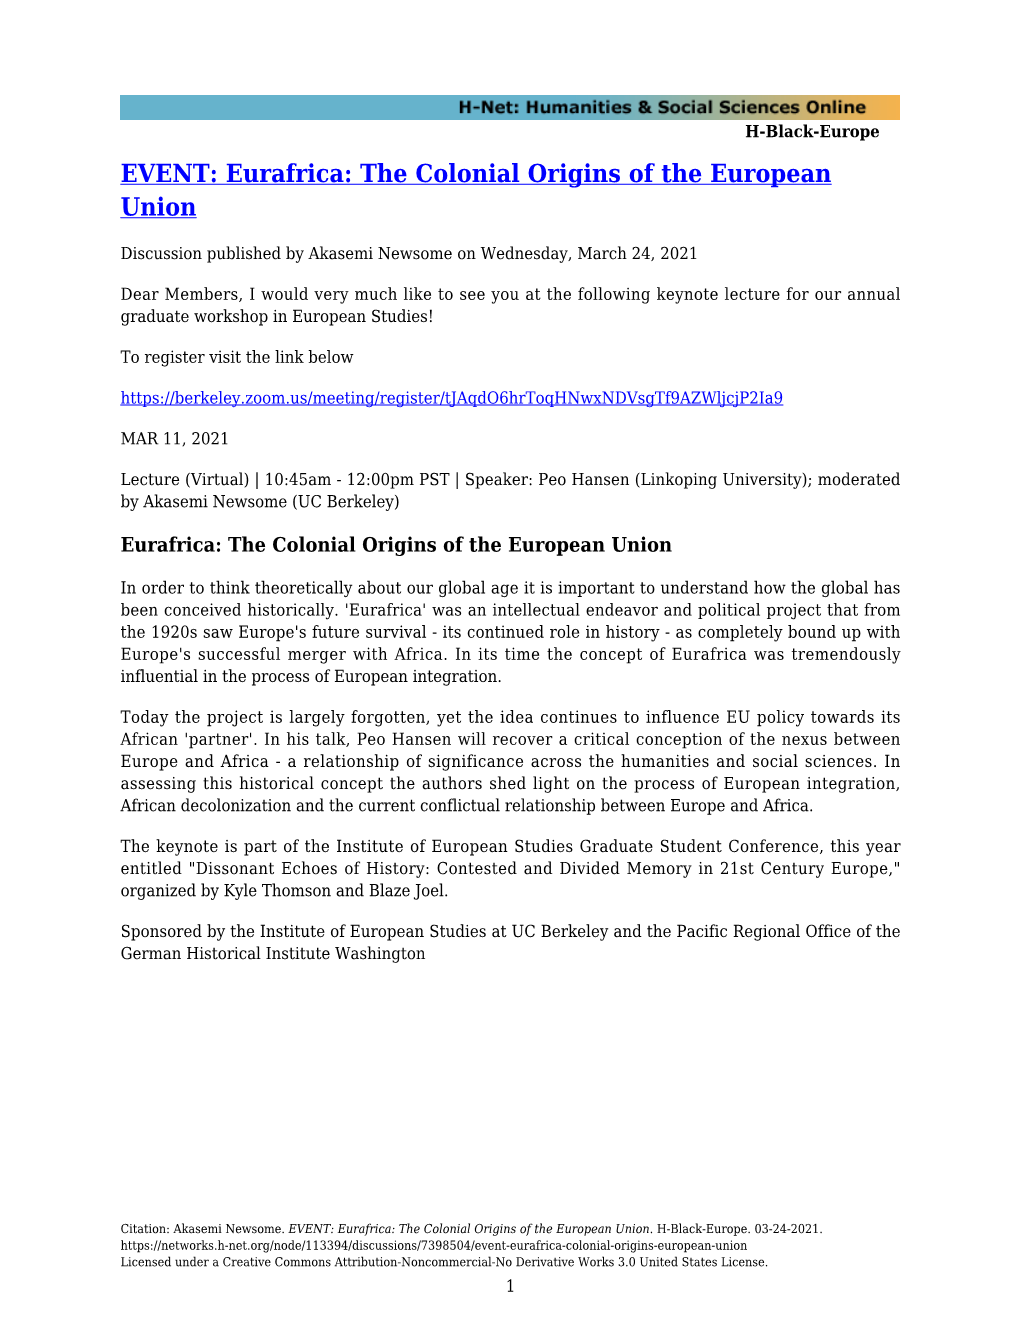 EVENT: Eurafrica: the Colonial Origins of the European Union